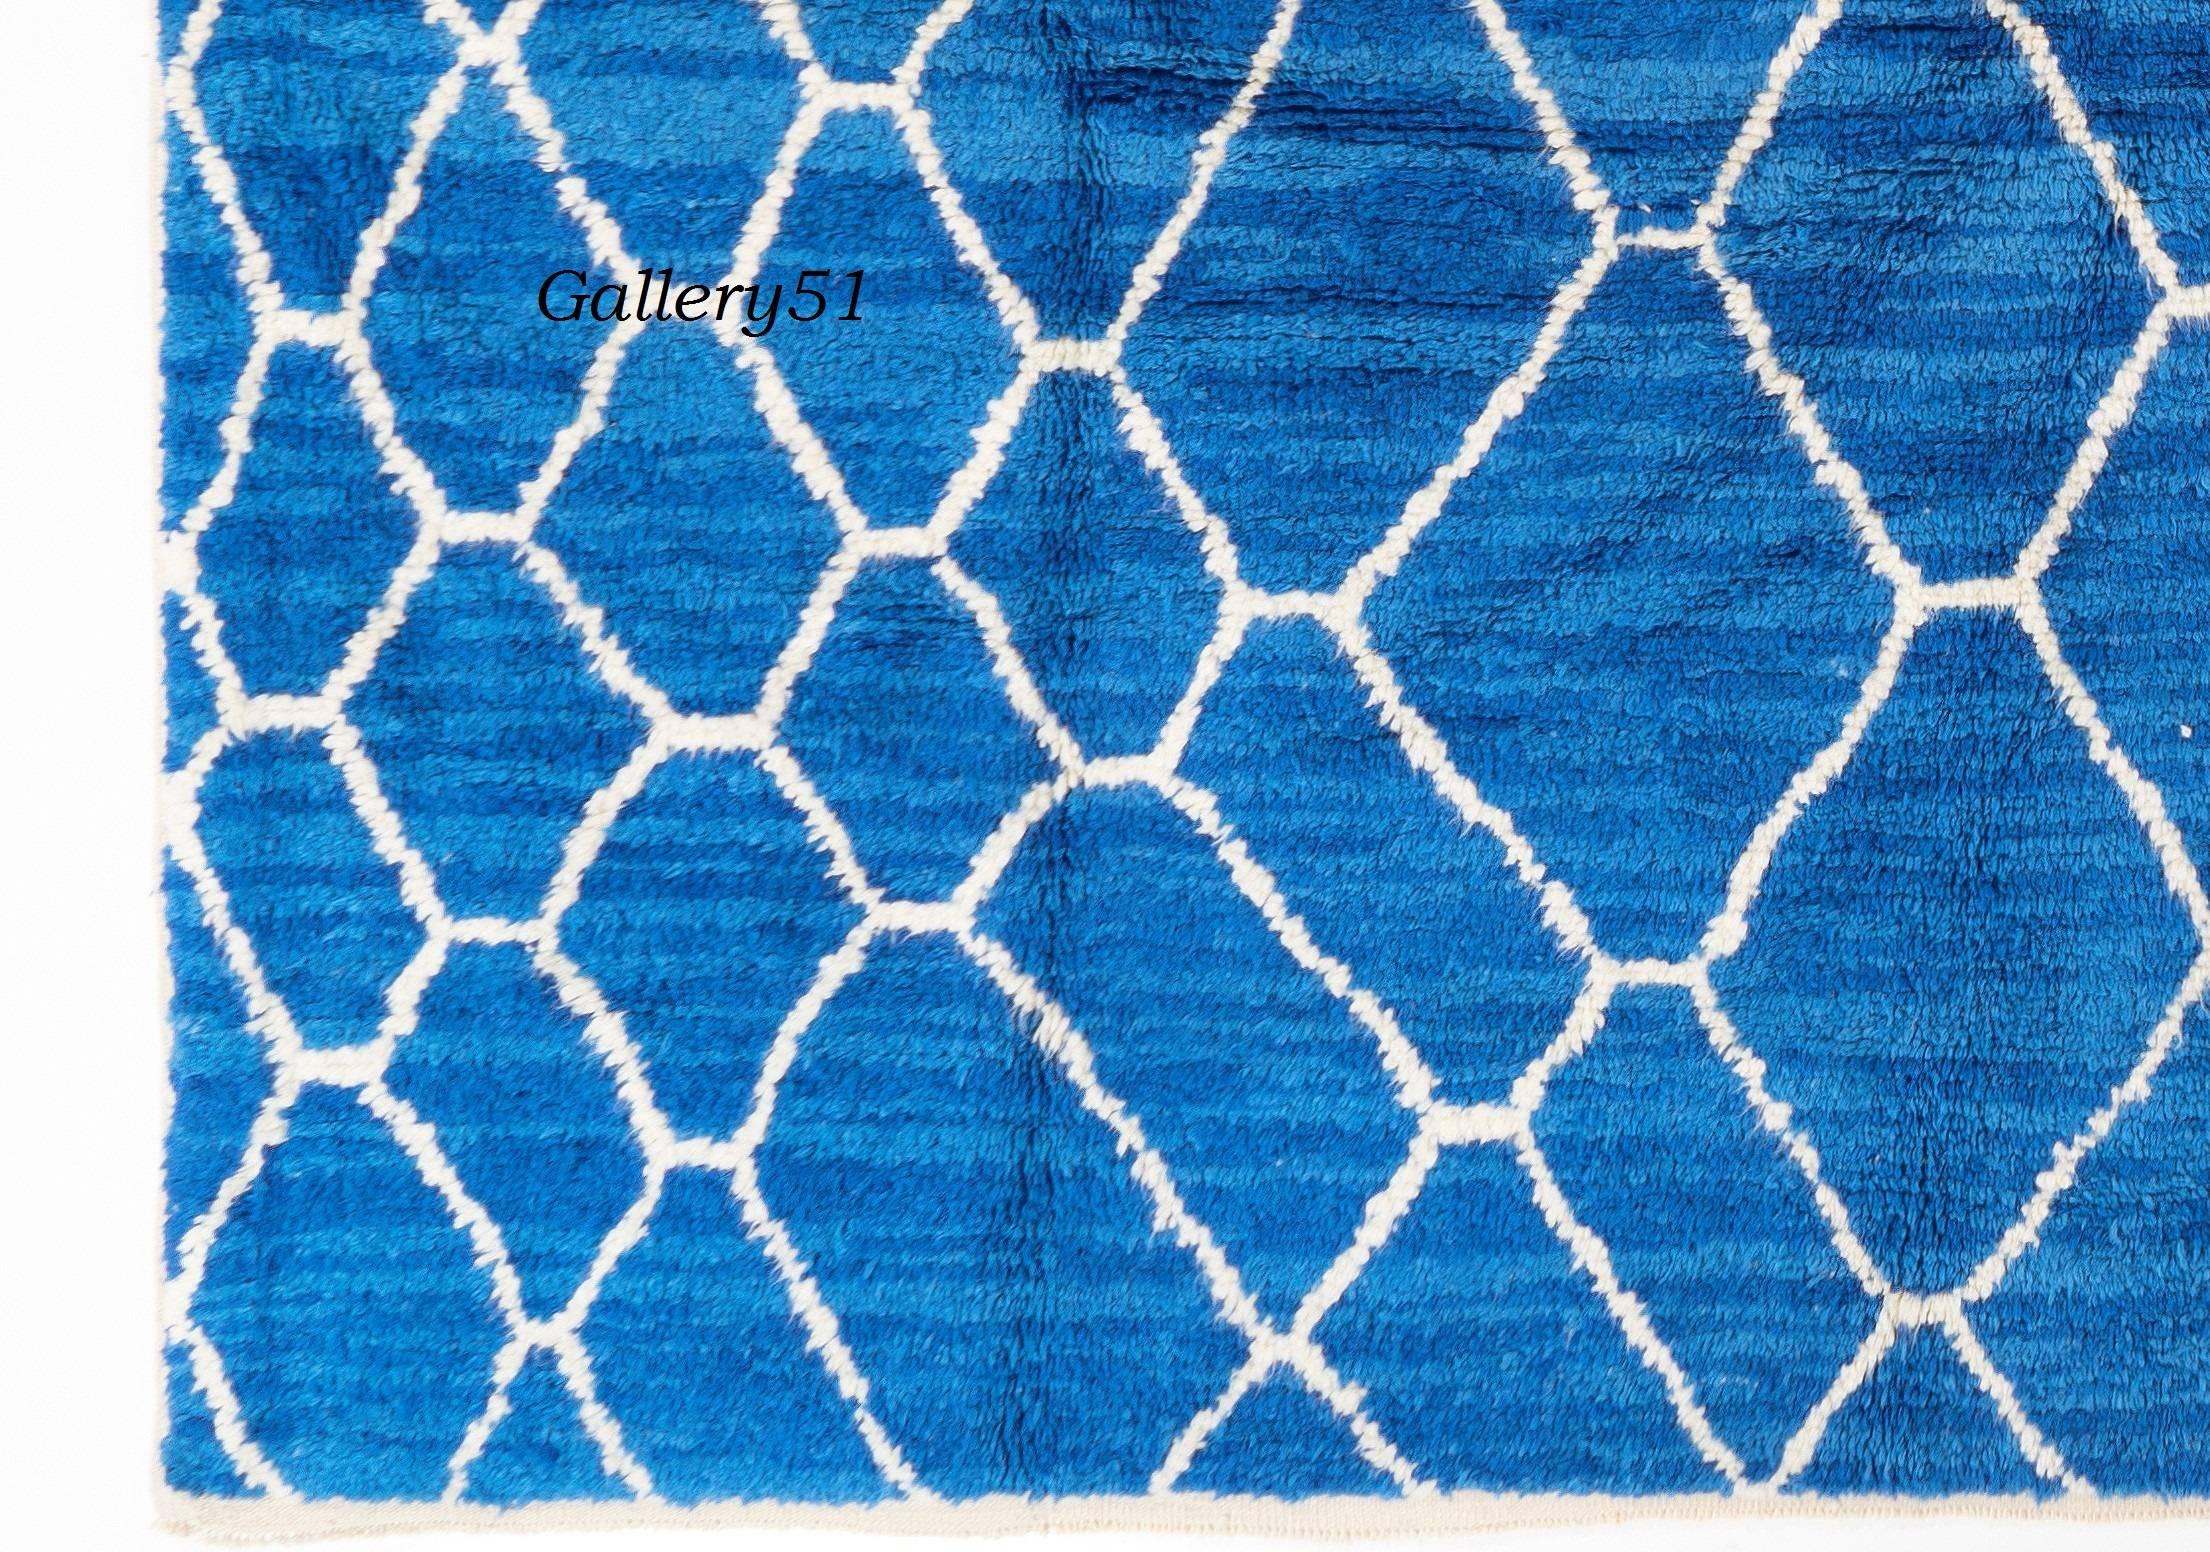 The slightly darker and lighter hues of the striated indigo blue field of this eye-catching Moroccan design contemporary hand knotted rug makes it look as if it's shimmering deep inside.
With a white net of loosely shaped lozenges of differing scale